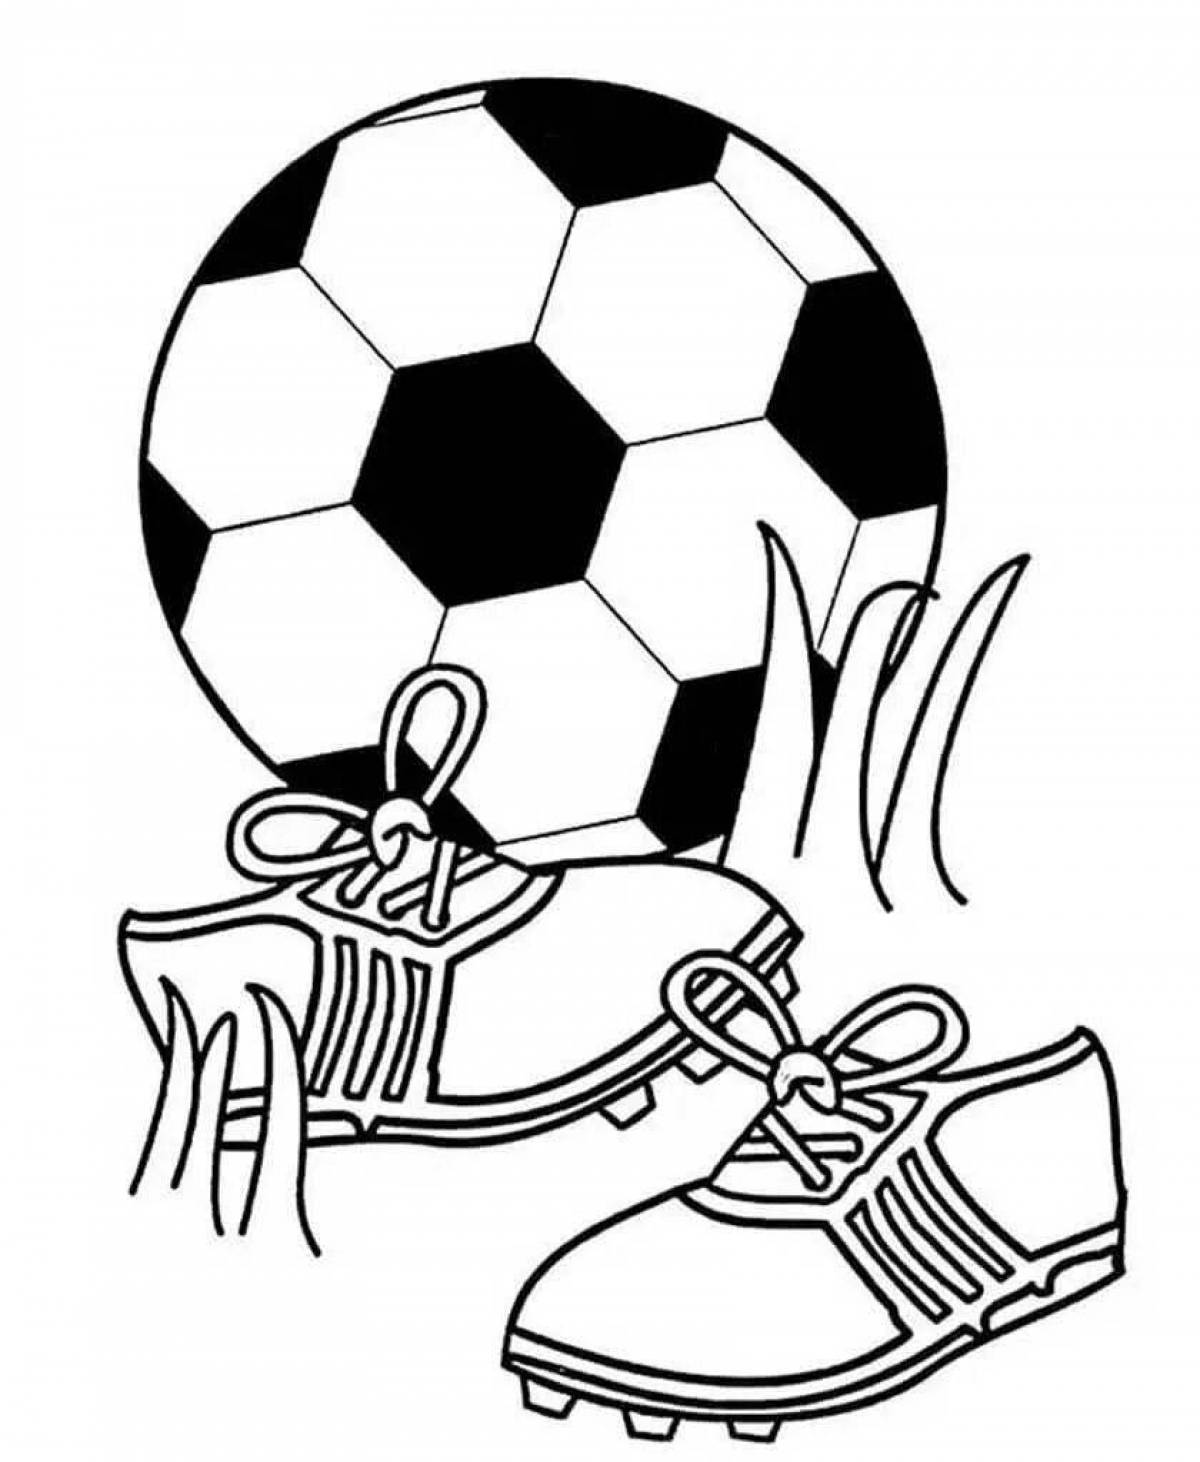 Adorable soccer ball coloring book for kids